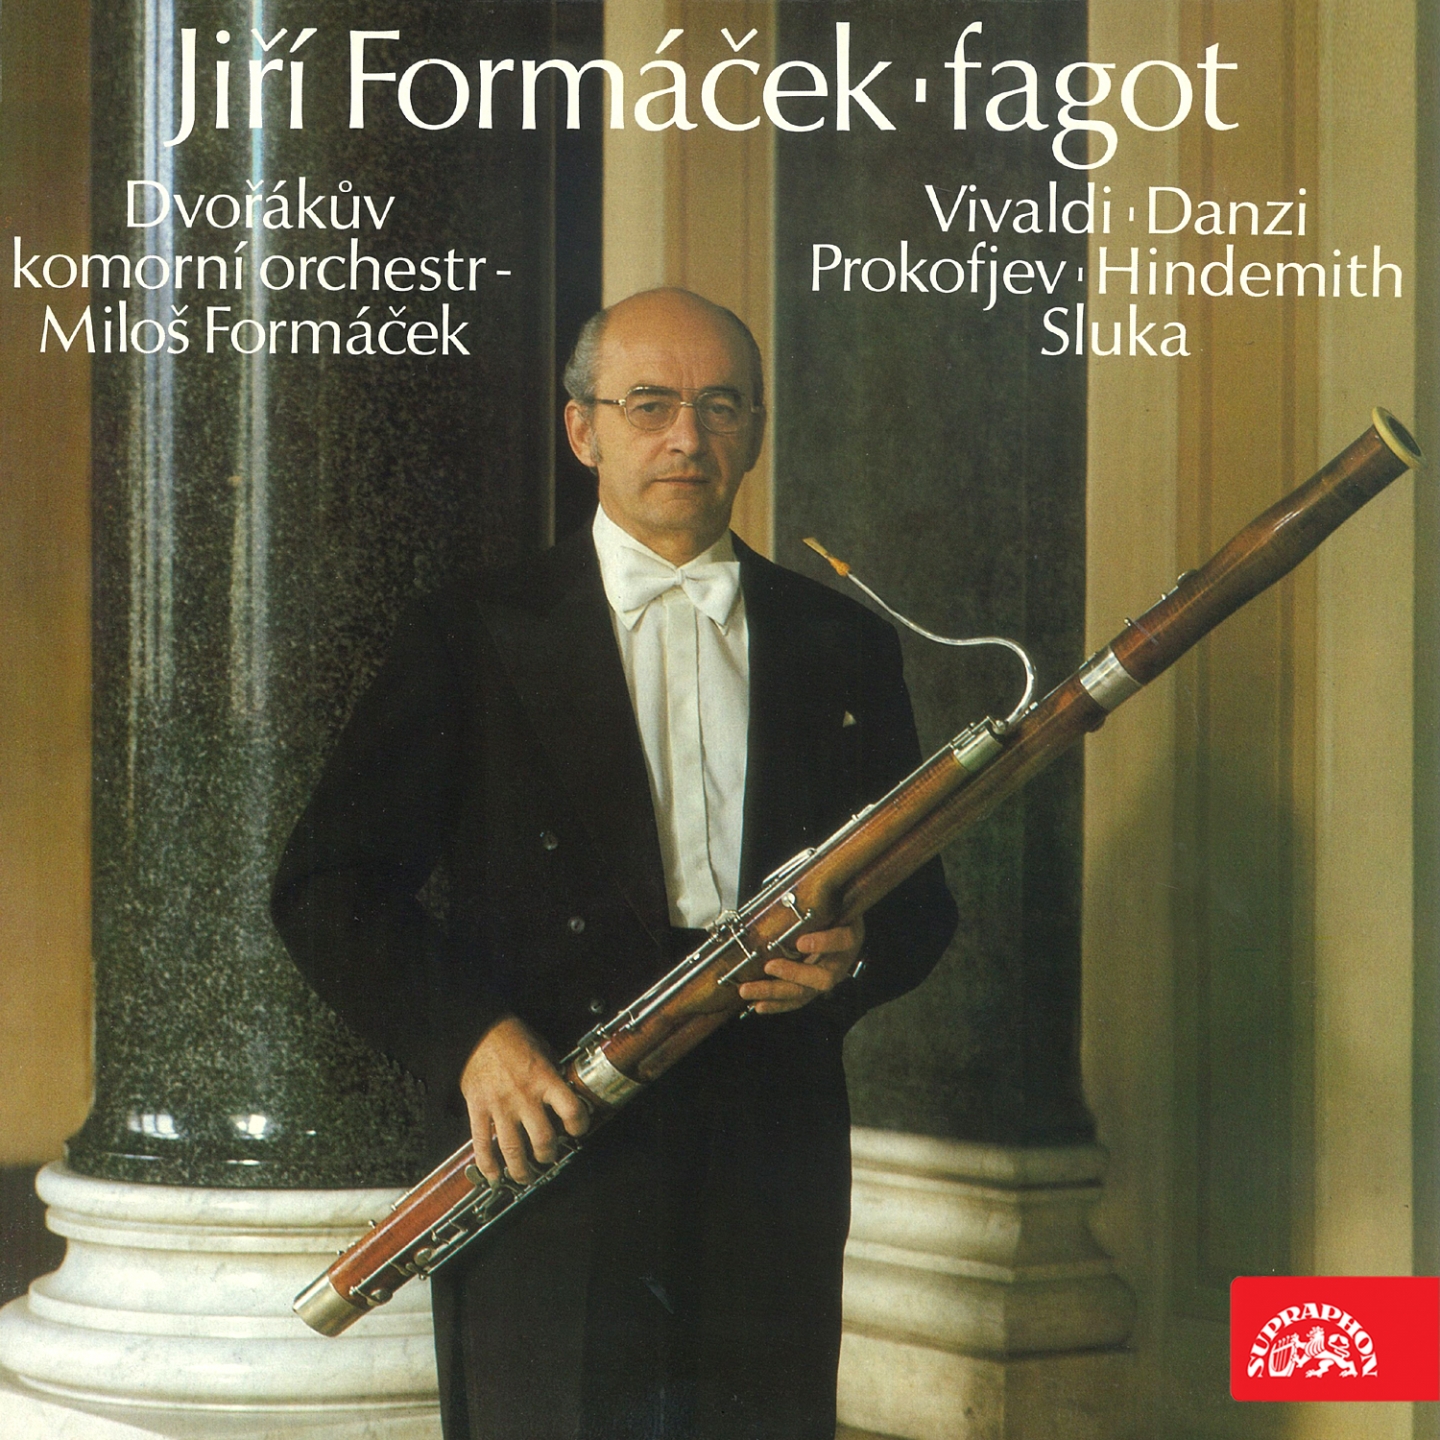 Concerto for Bassoon, Strings and Continuo in C-Sharp Major, .: III. Allegro